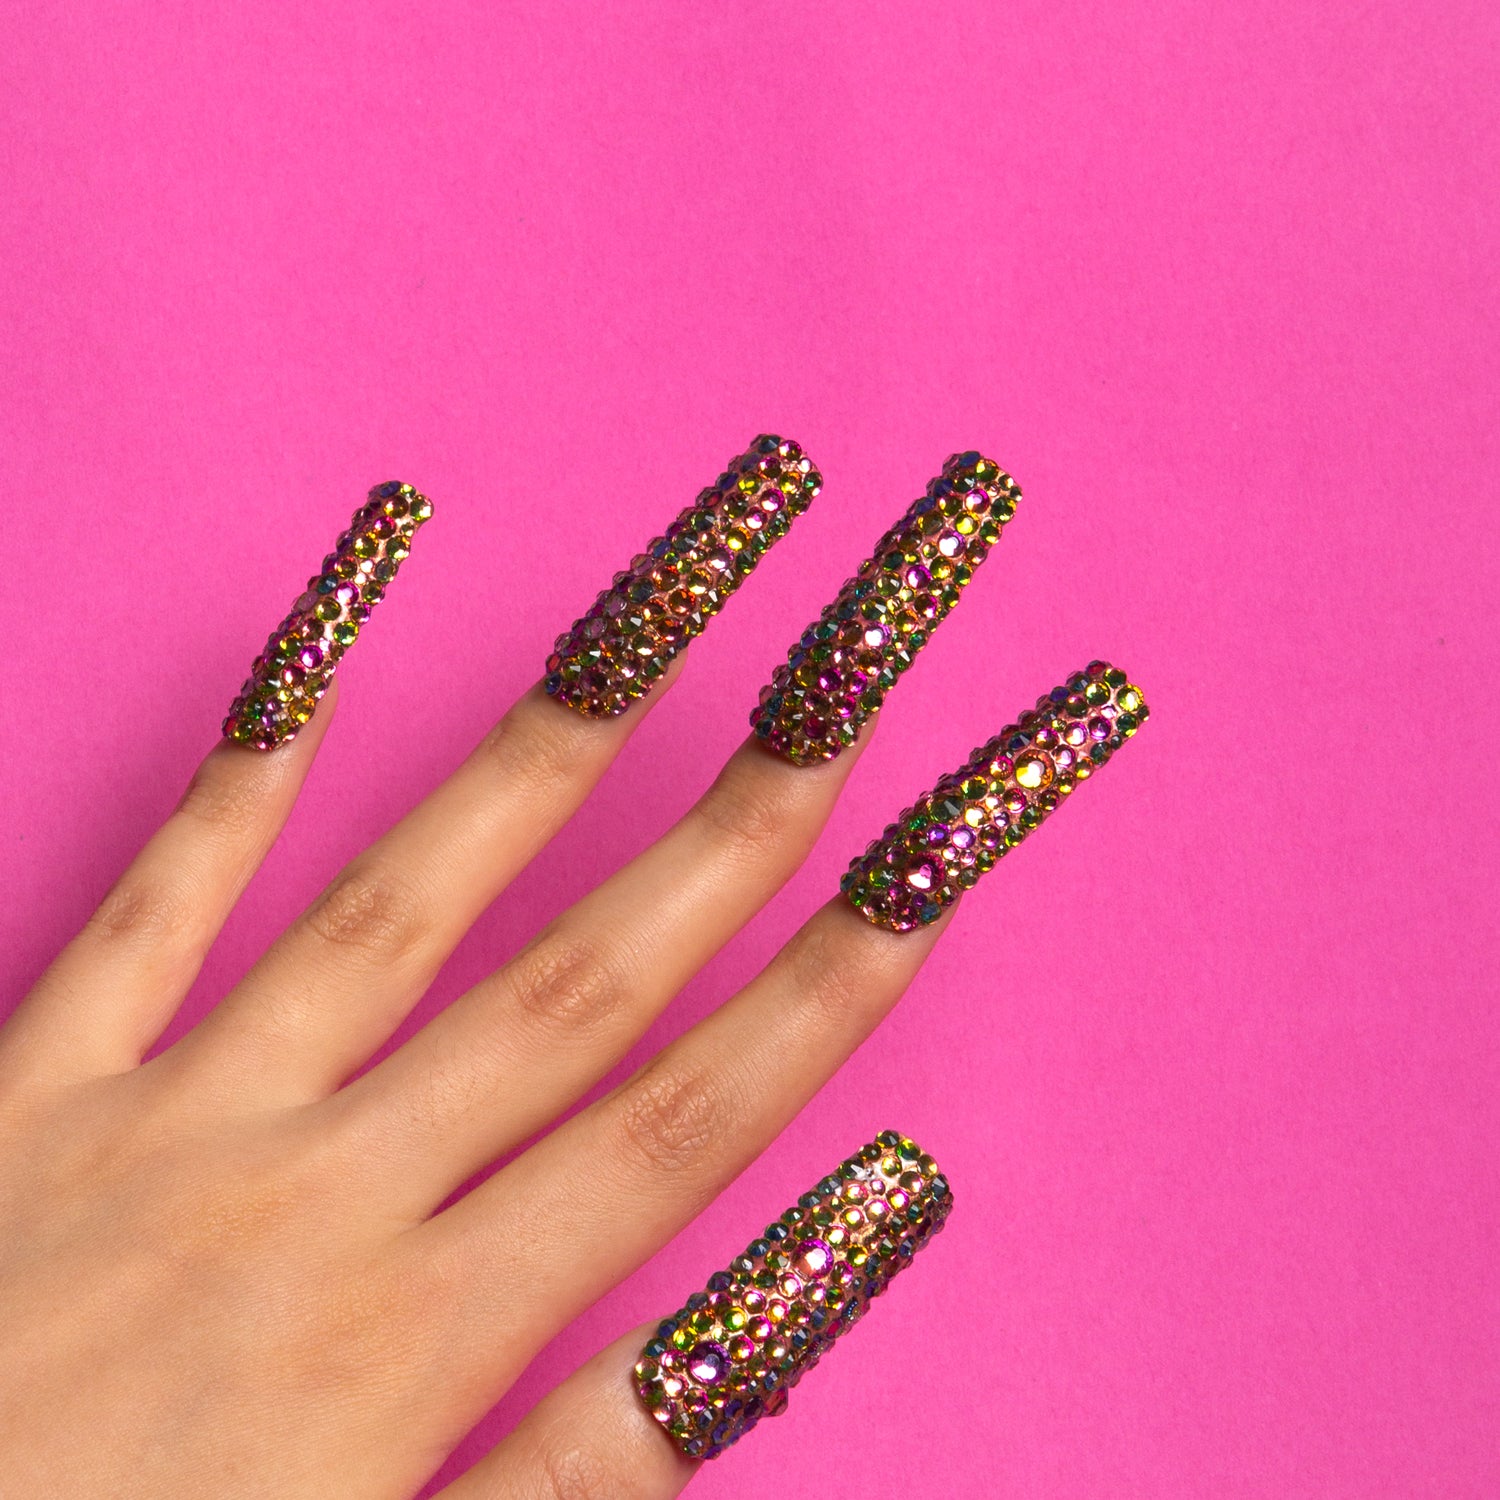 Classic Rhinestone Press-On Nails are covered in glitter, making your hands look great.